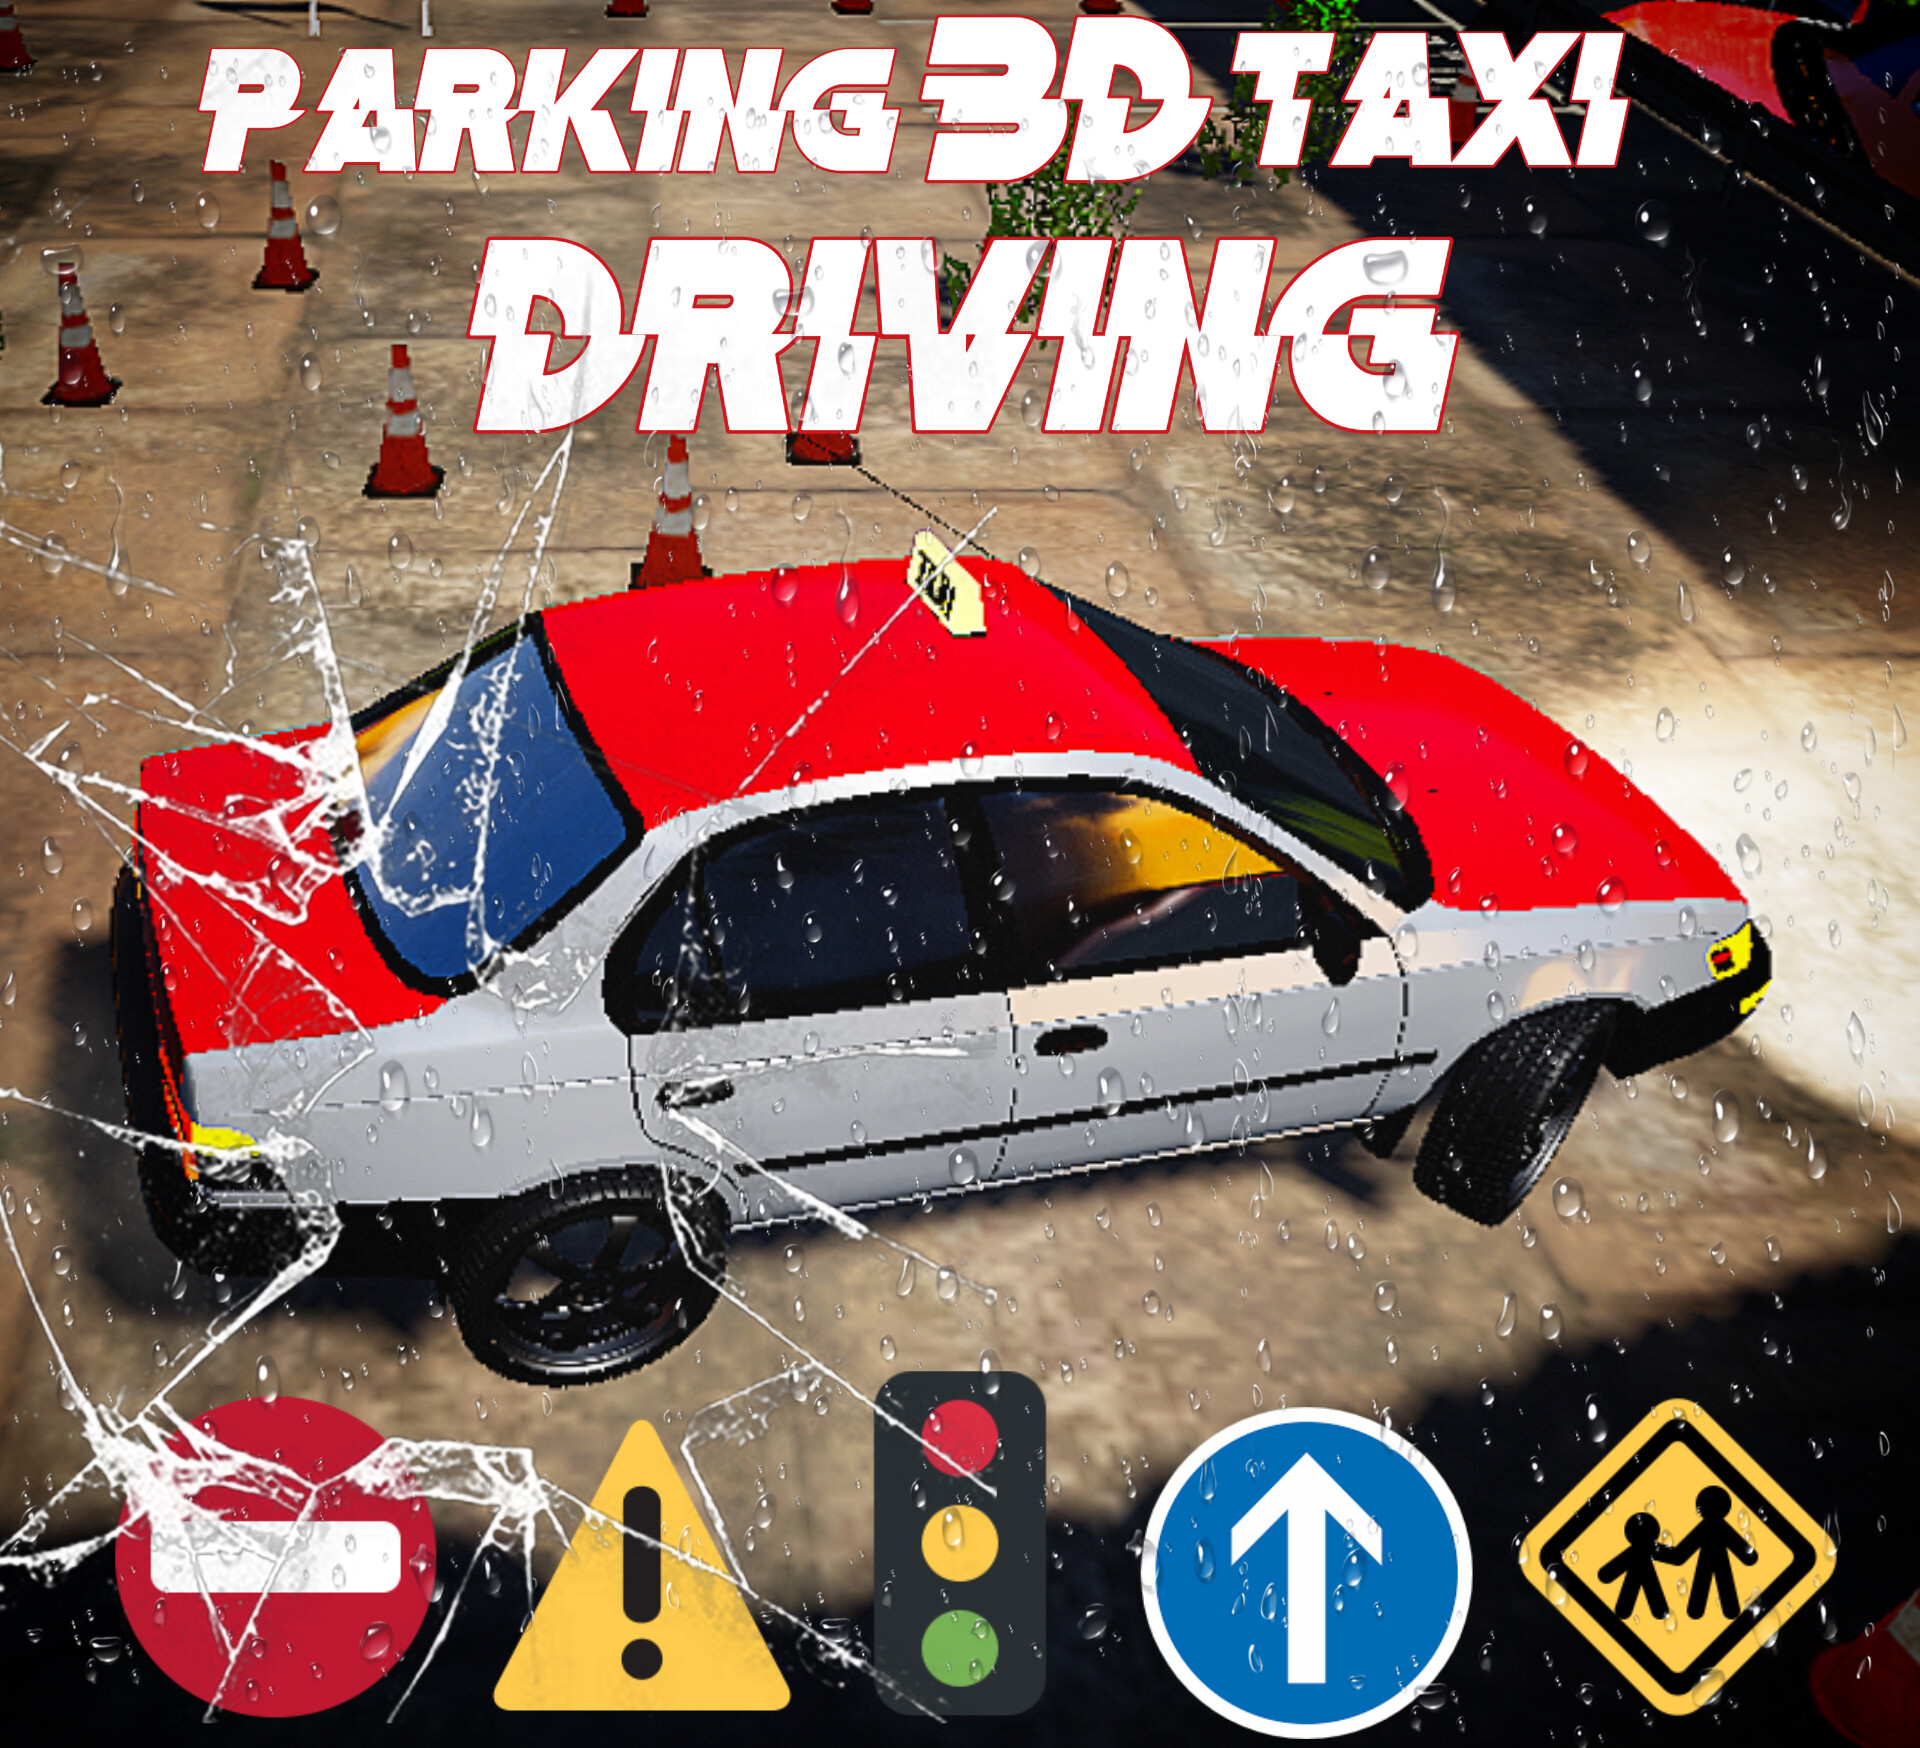 PARKING 3D TAXI DRIVING